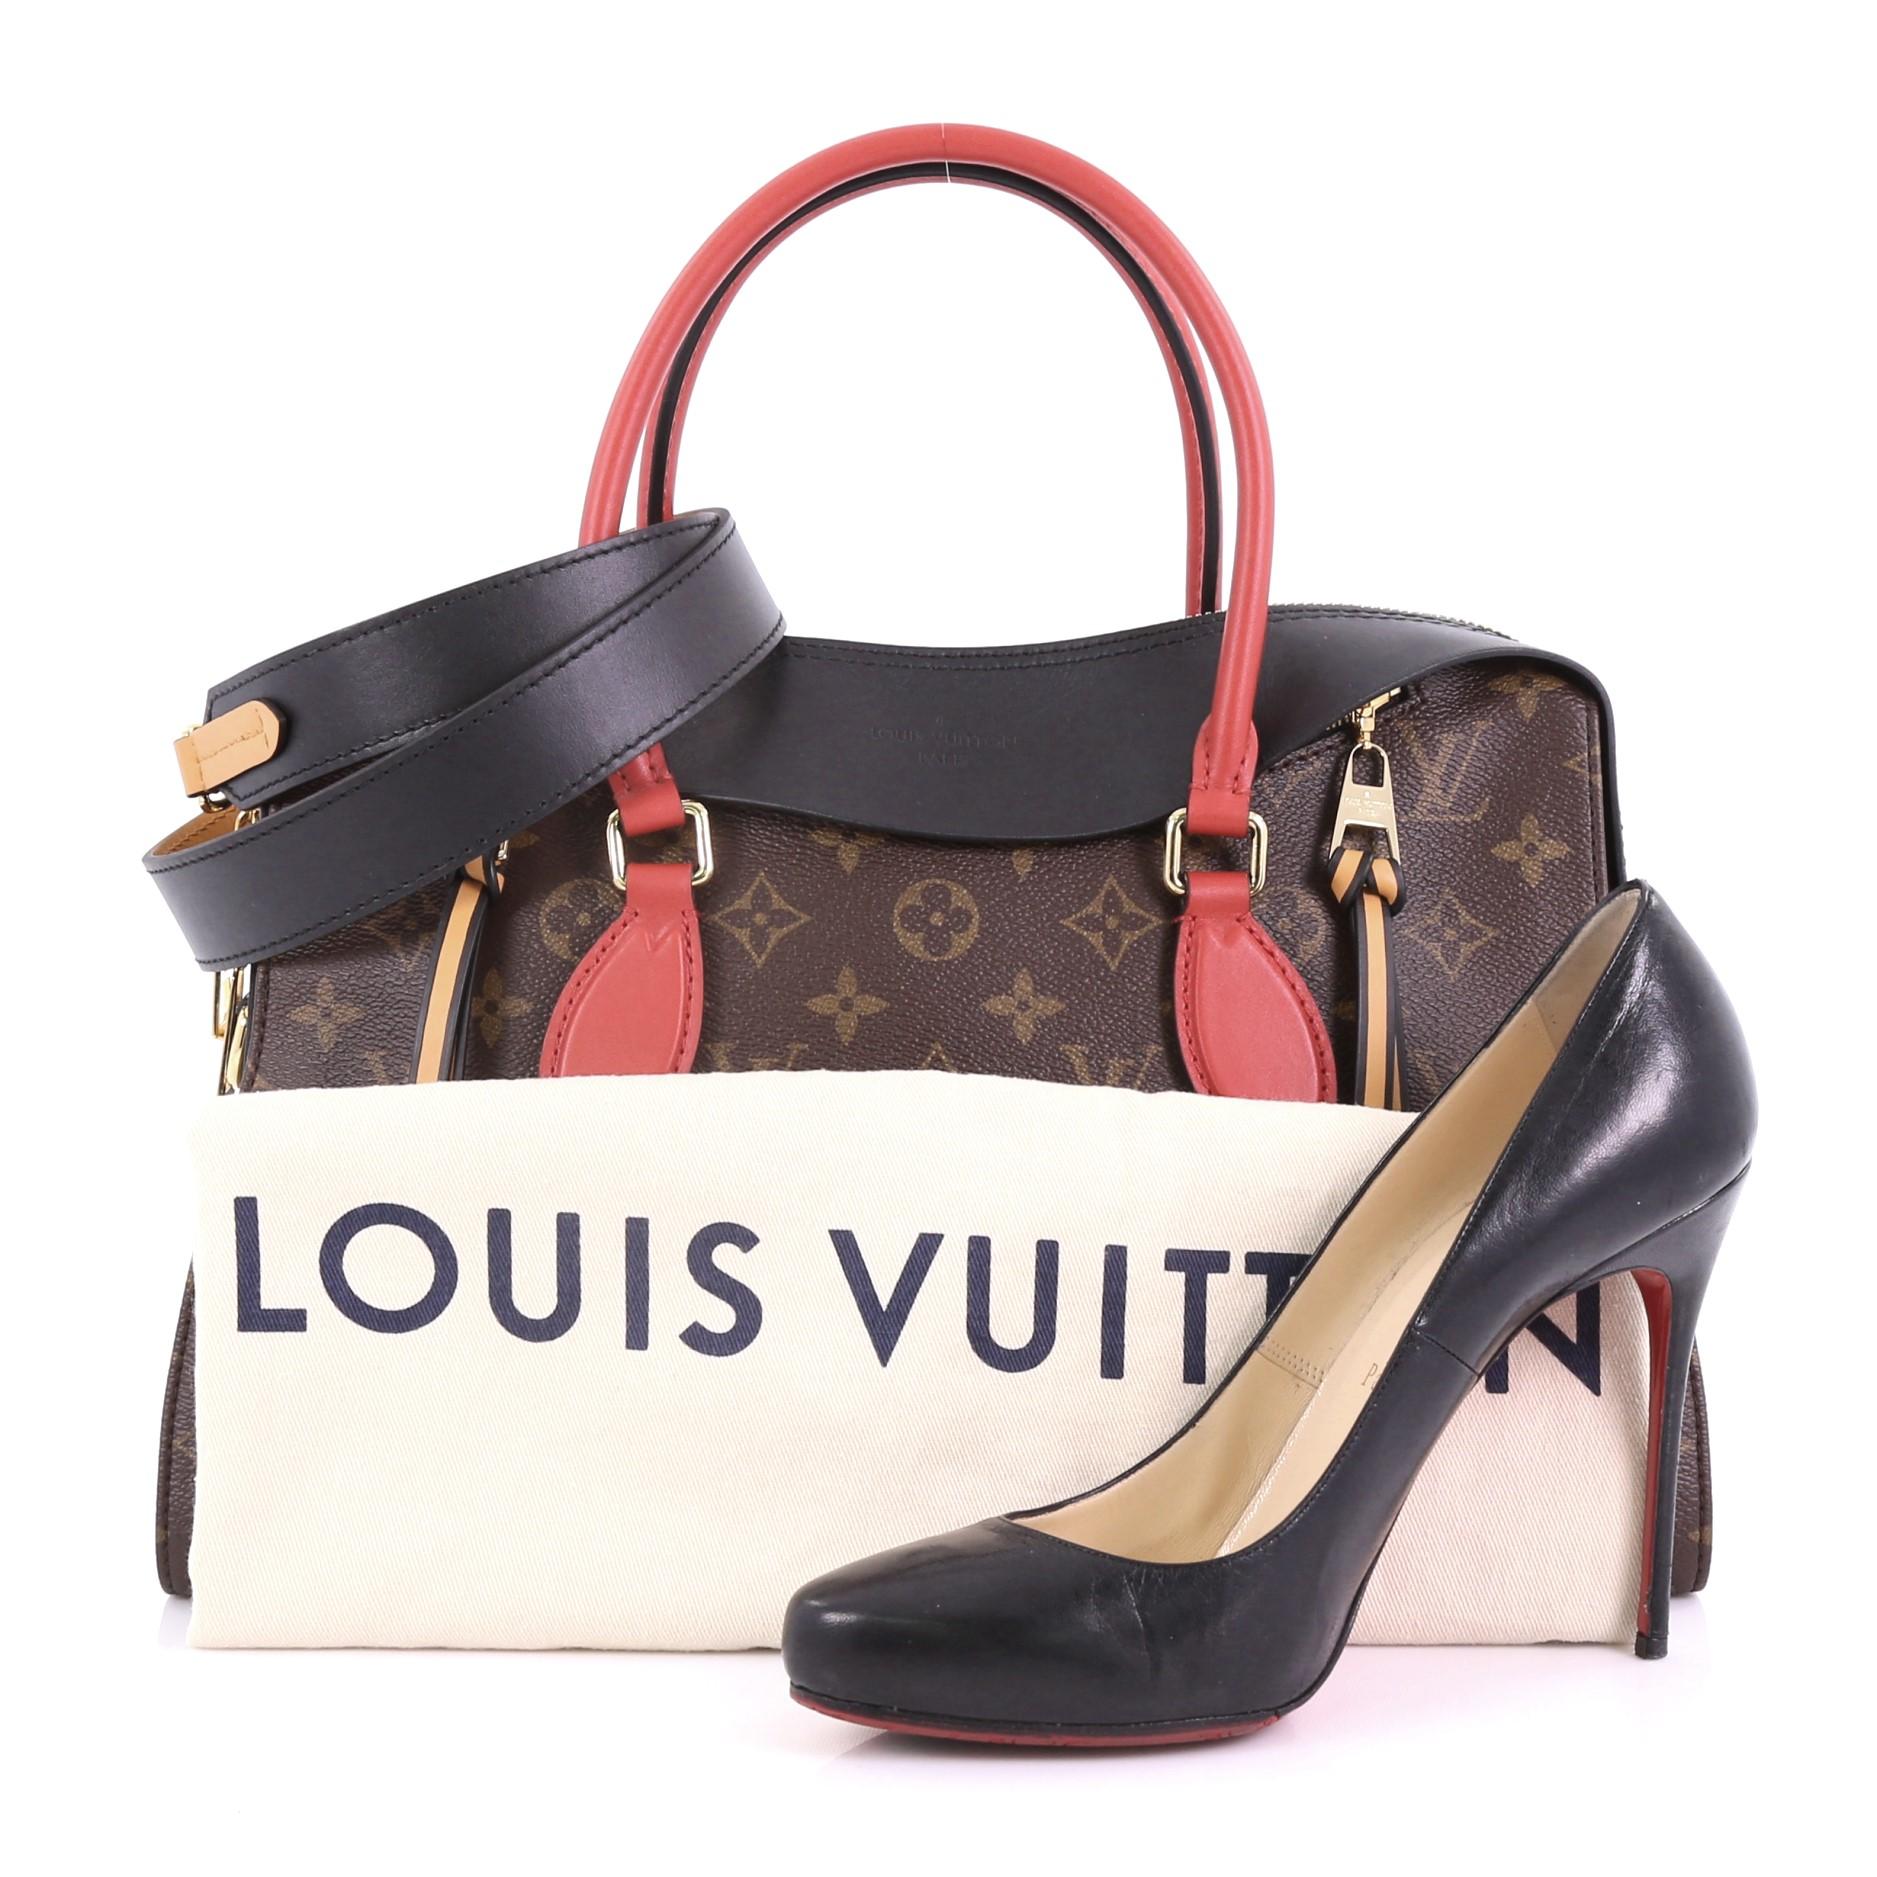 This Louis Vuitton Tuileries Handbag Monogram Canvas with Leather, crafted in brown monogram coated canvas with black leather, features dual toron handles, leather details, and gold-tone hardware. Its dual zip closure opens to a beige microfiber